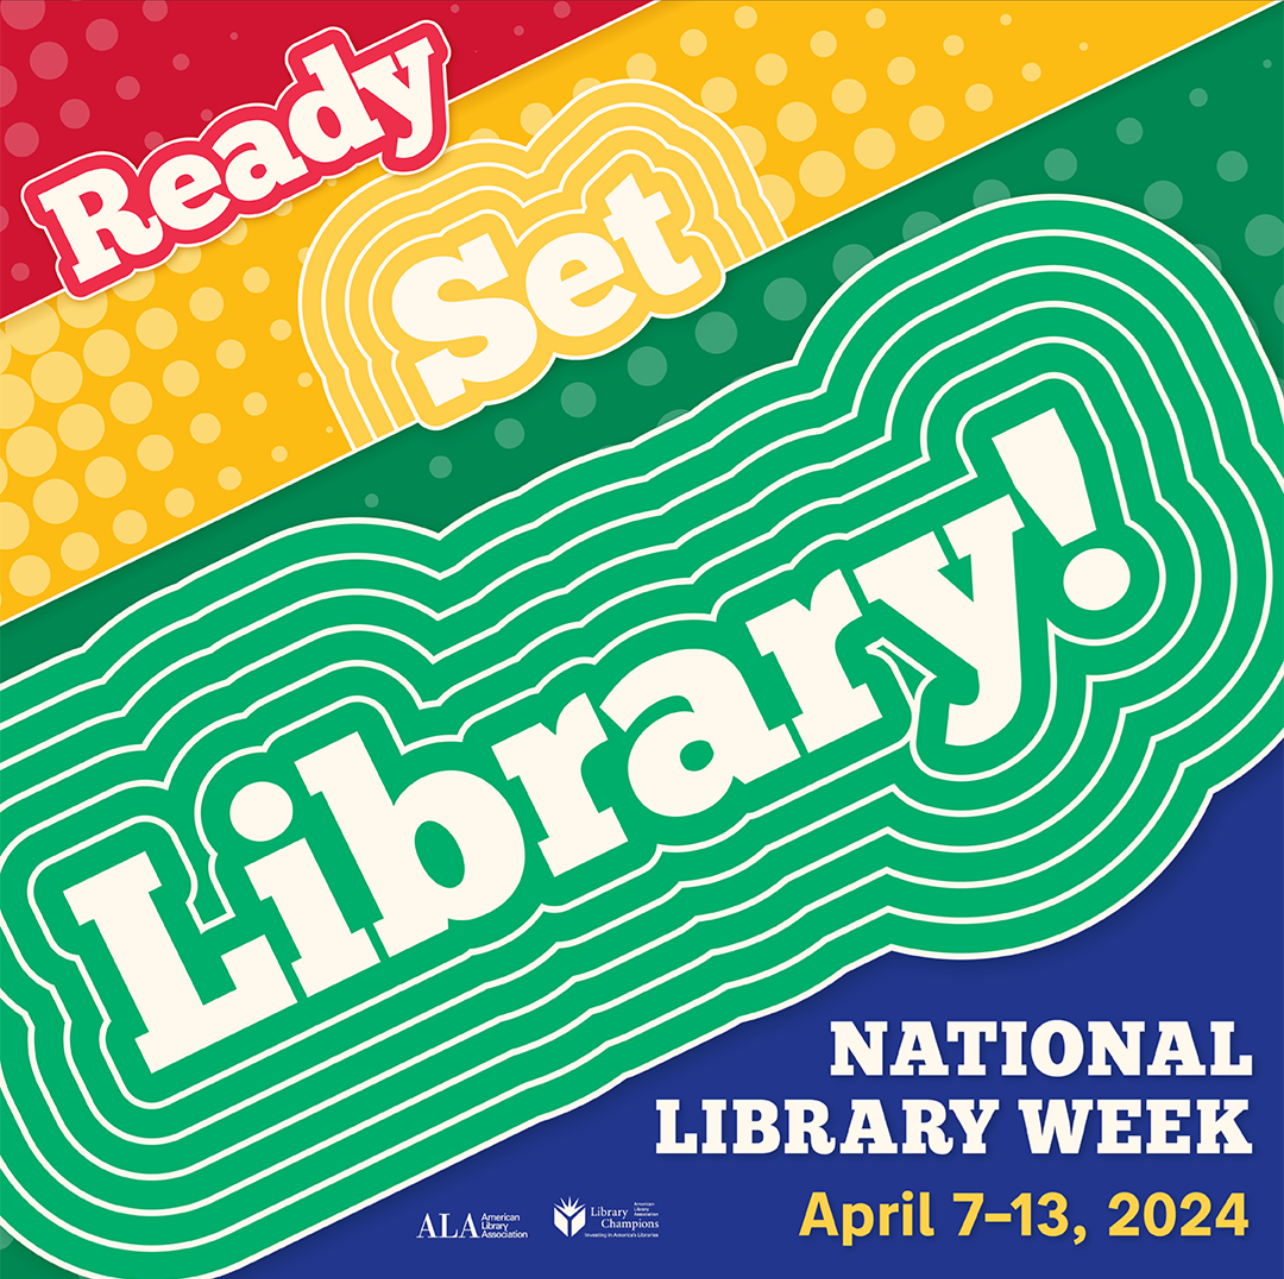 Ready, Set, Library! National Library Week April 7-13, 2024